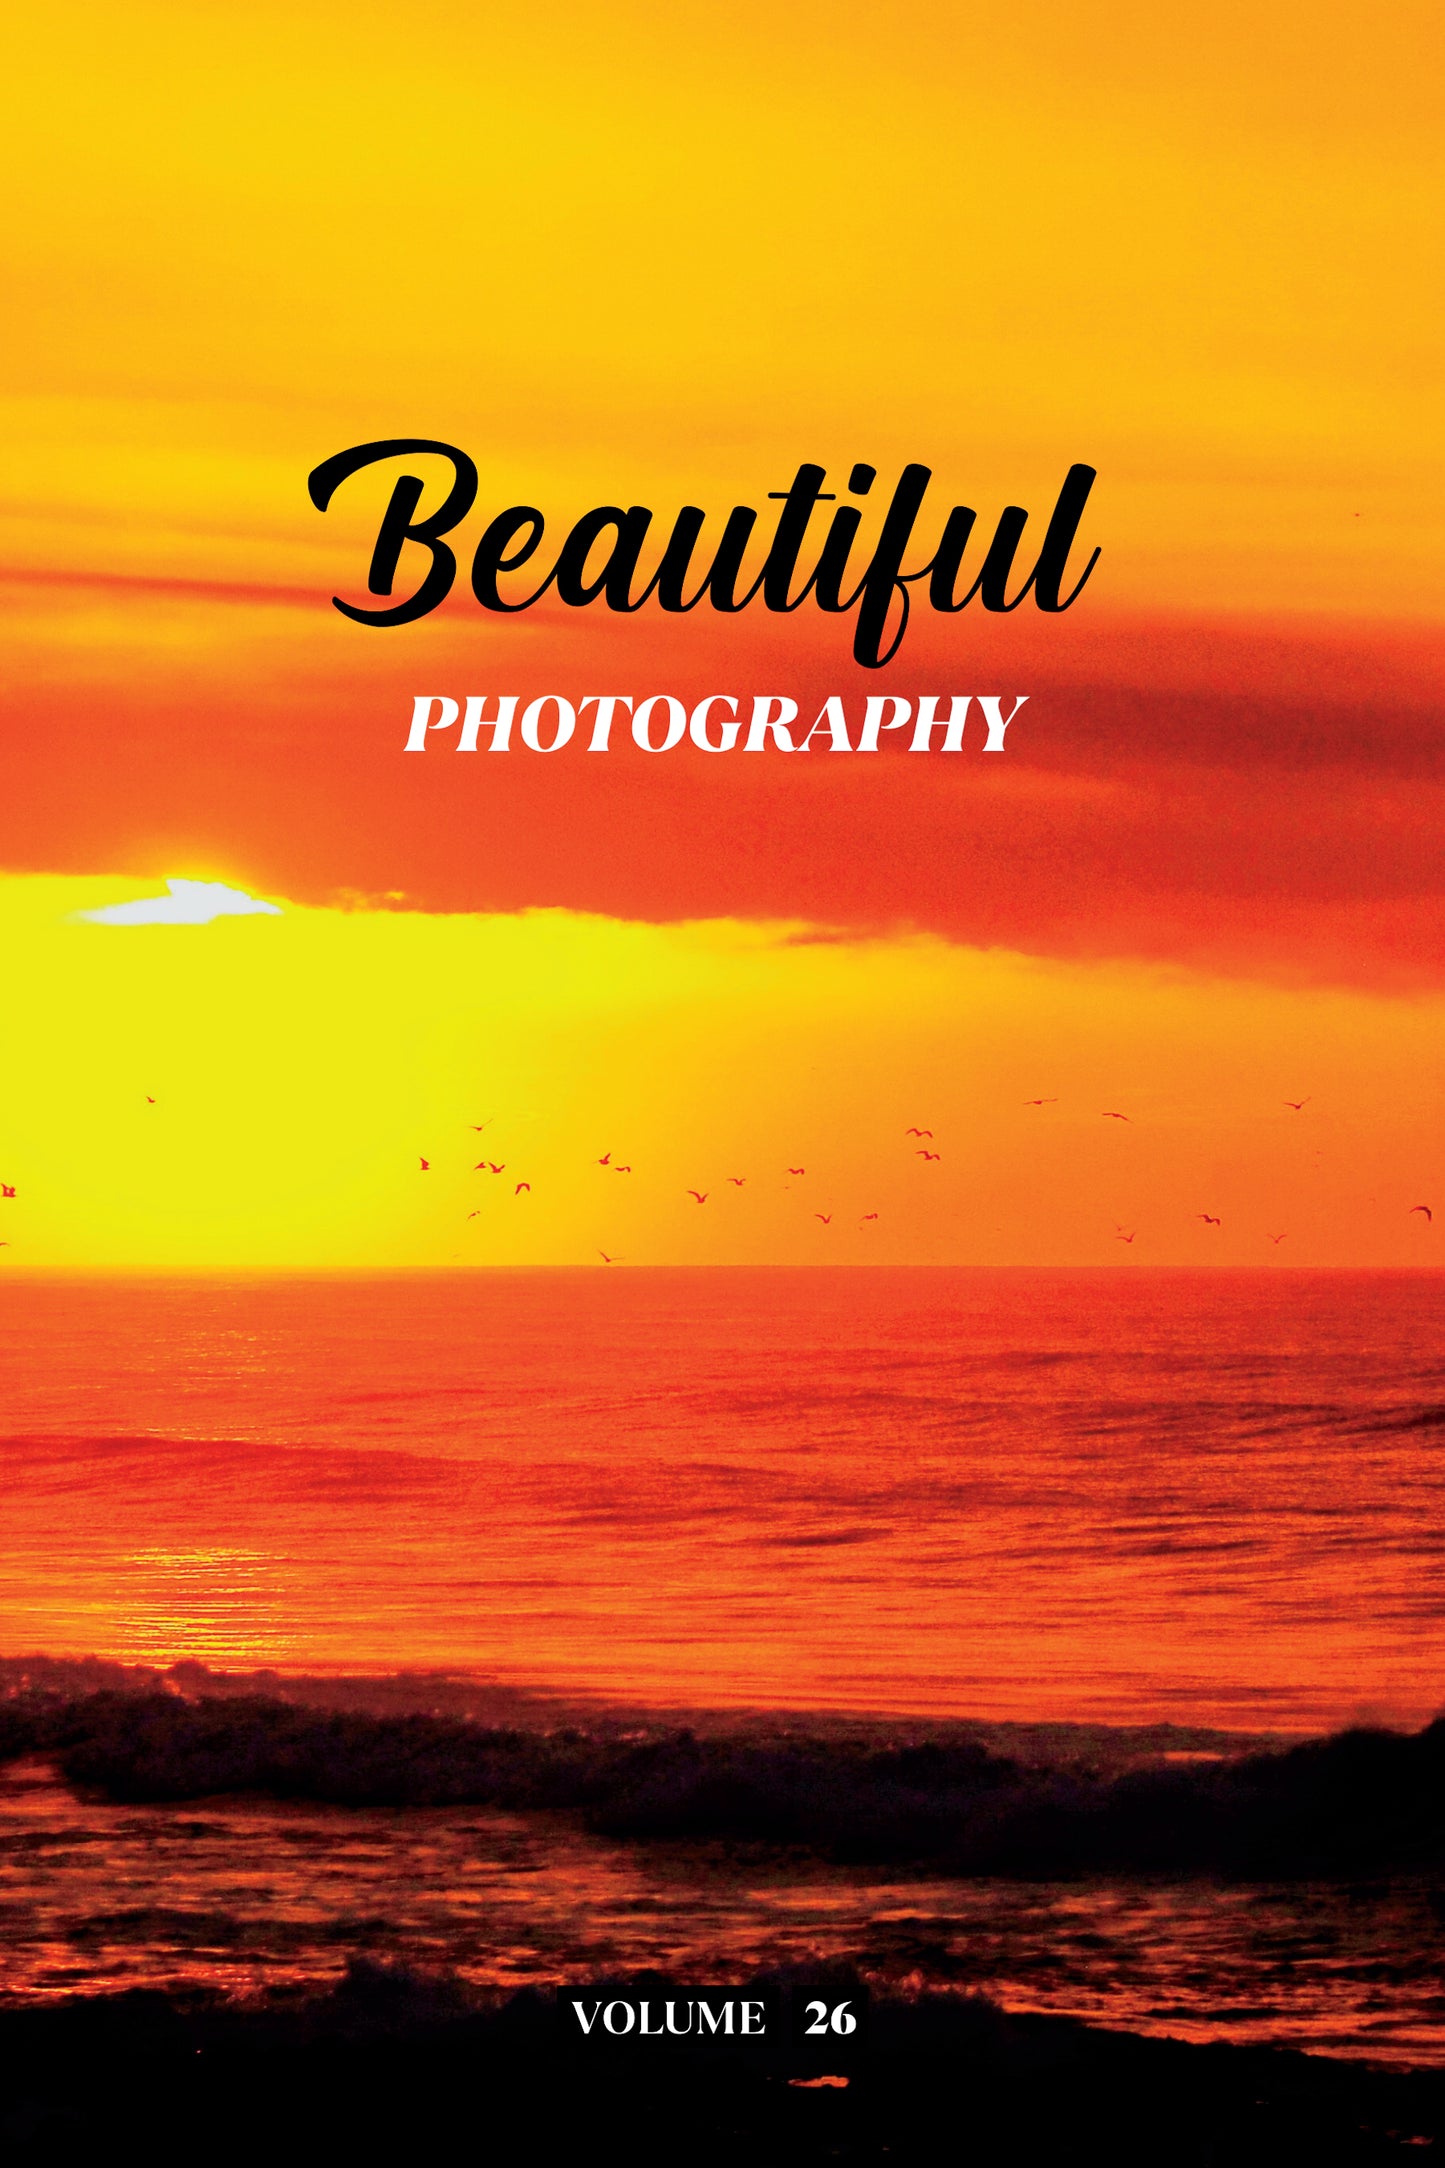 Beautiful Photography Volume 26 (Physical Book Pre-Order)